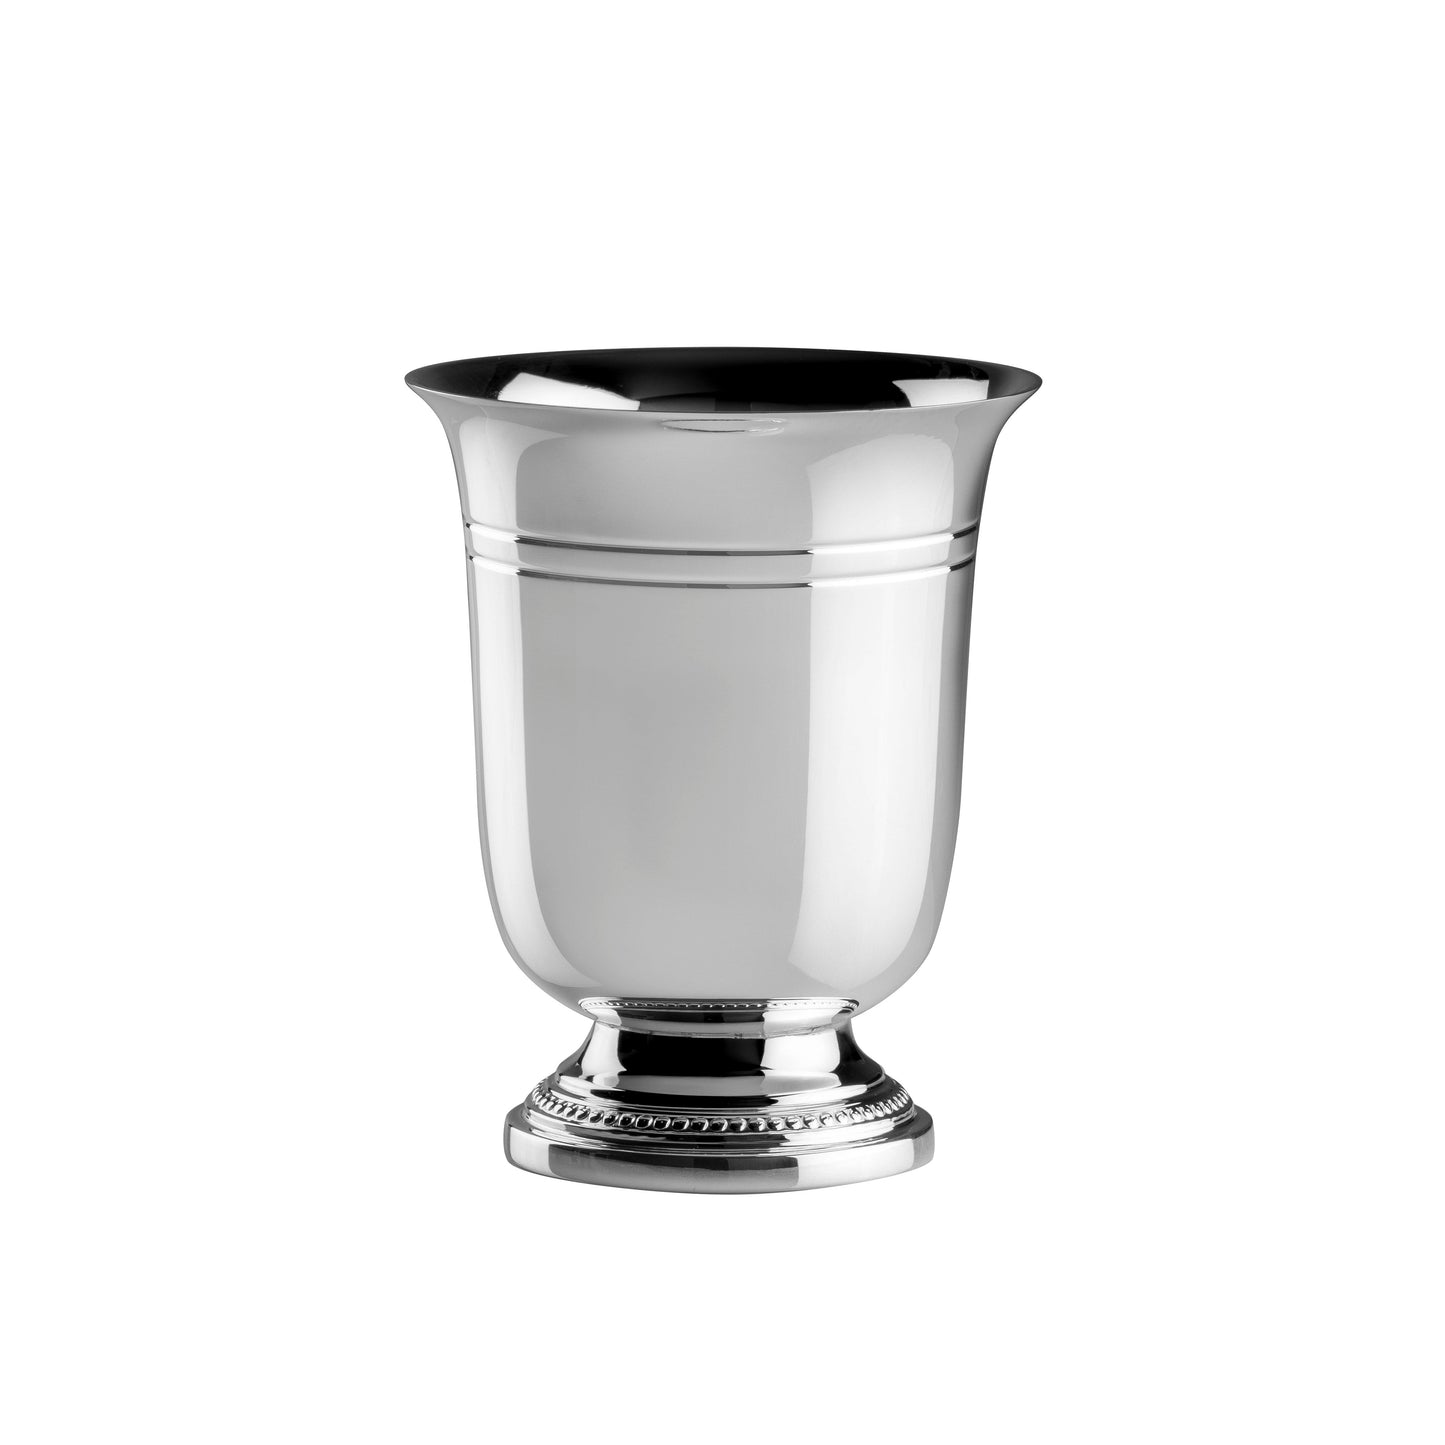 Timbale sur pied PERLES - argent massif